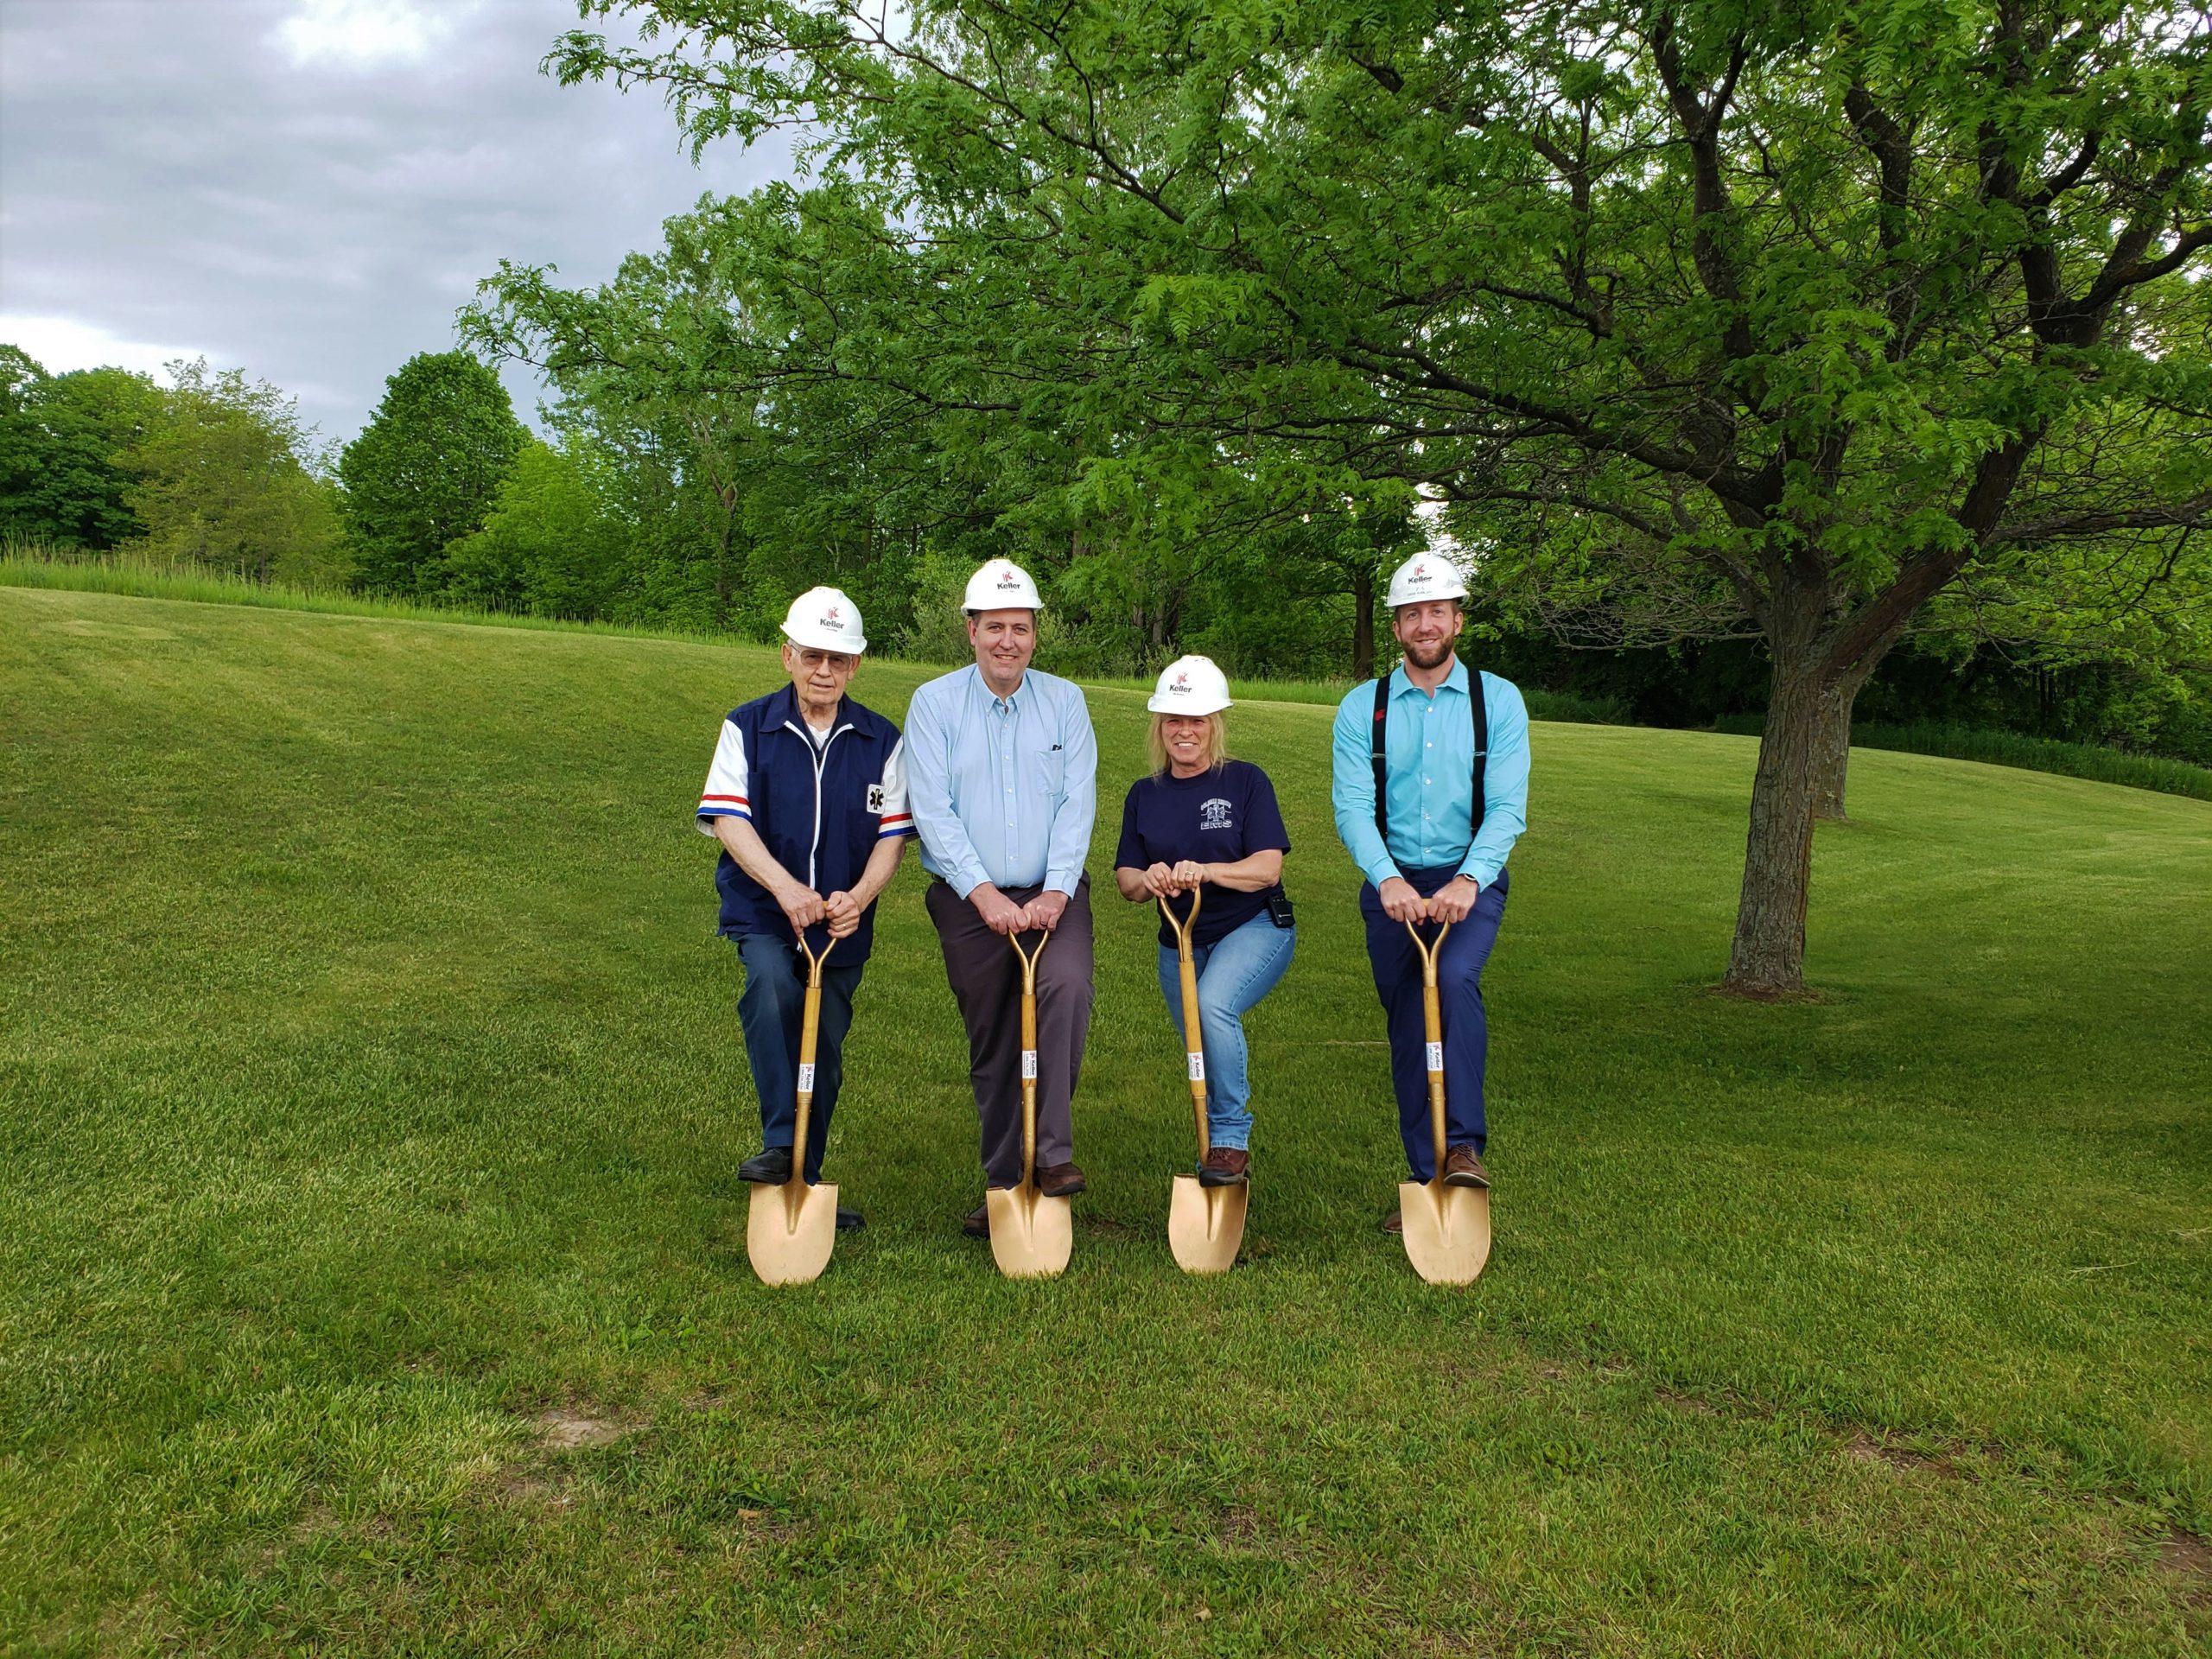 Team of four holding gold shovels and wearing hard hats at groundbreaking in grassy area